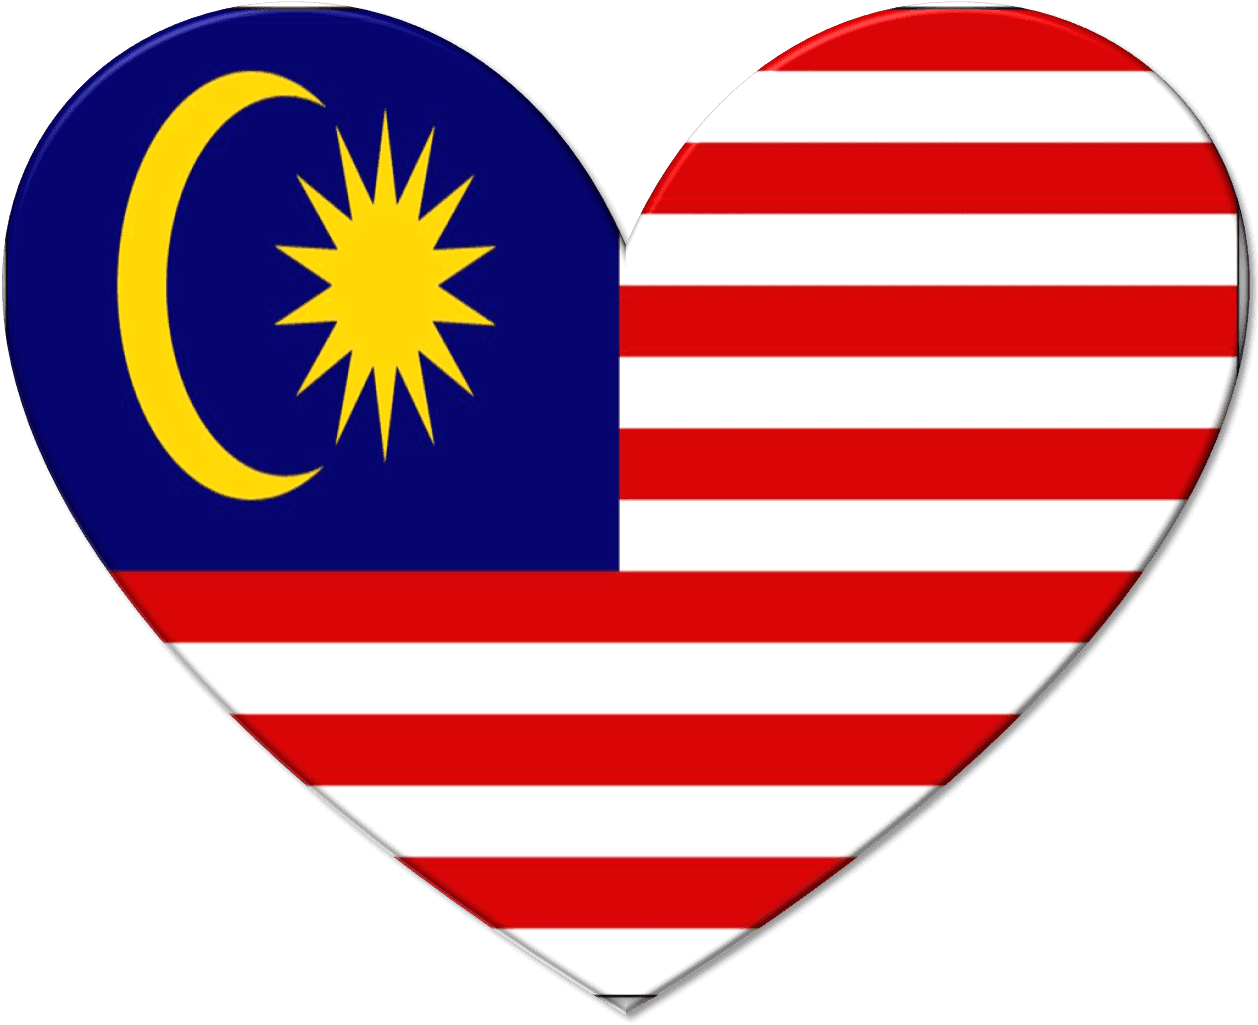 A Heart Shaped Flag With A Yellow Star And Crescent Moon